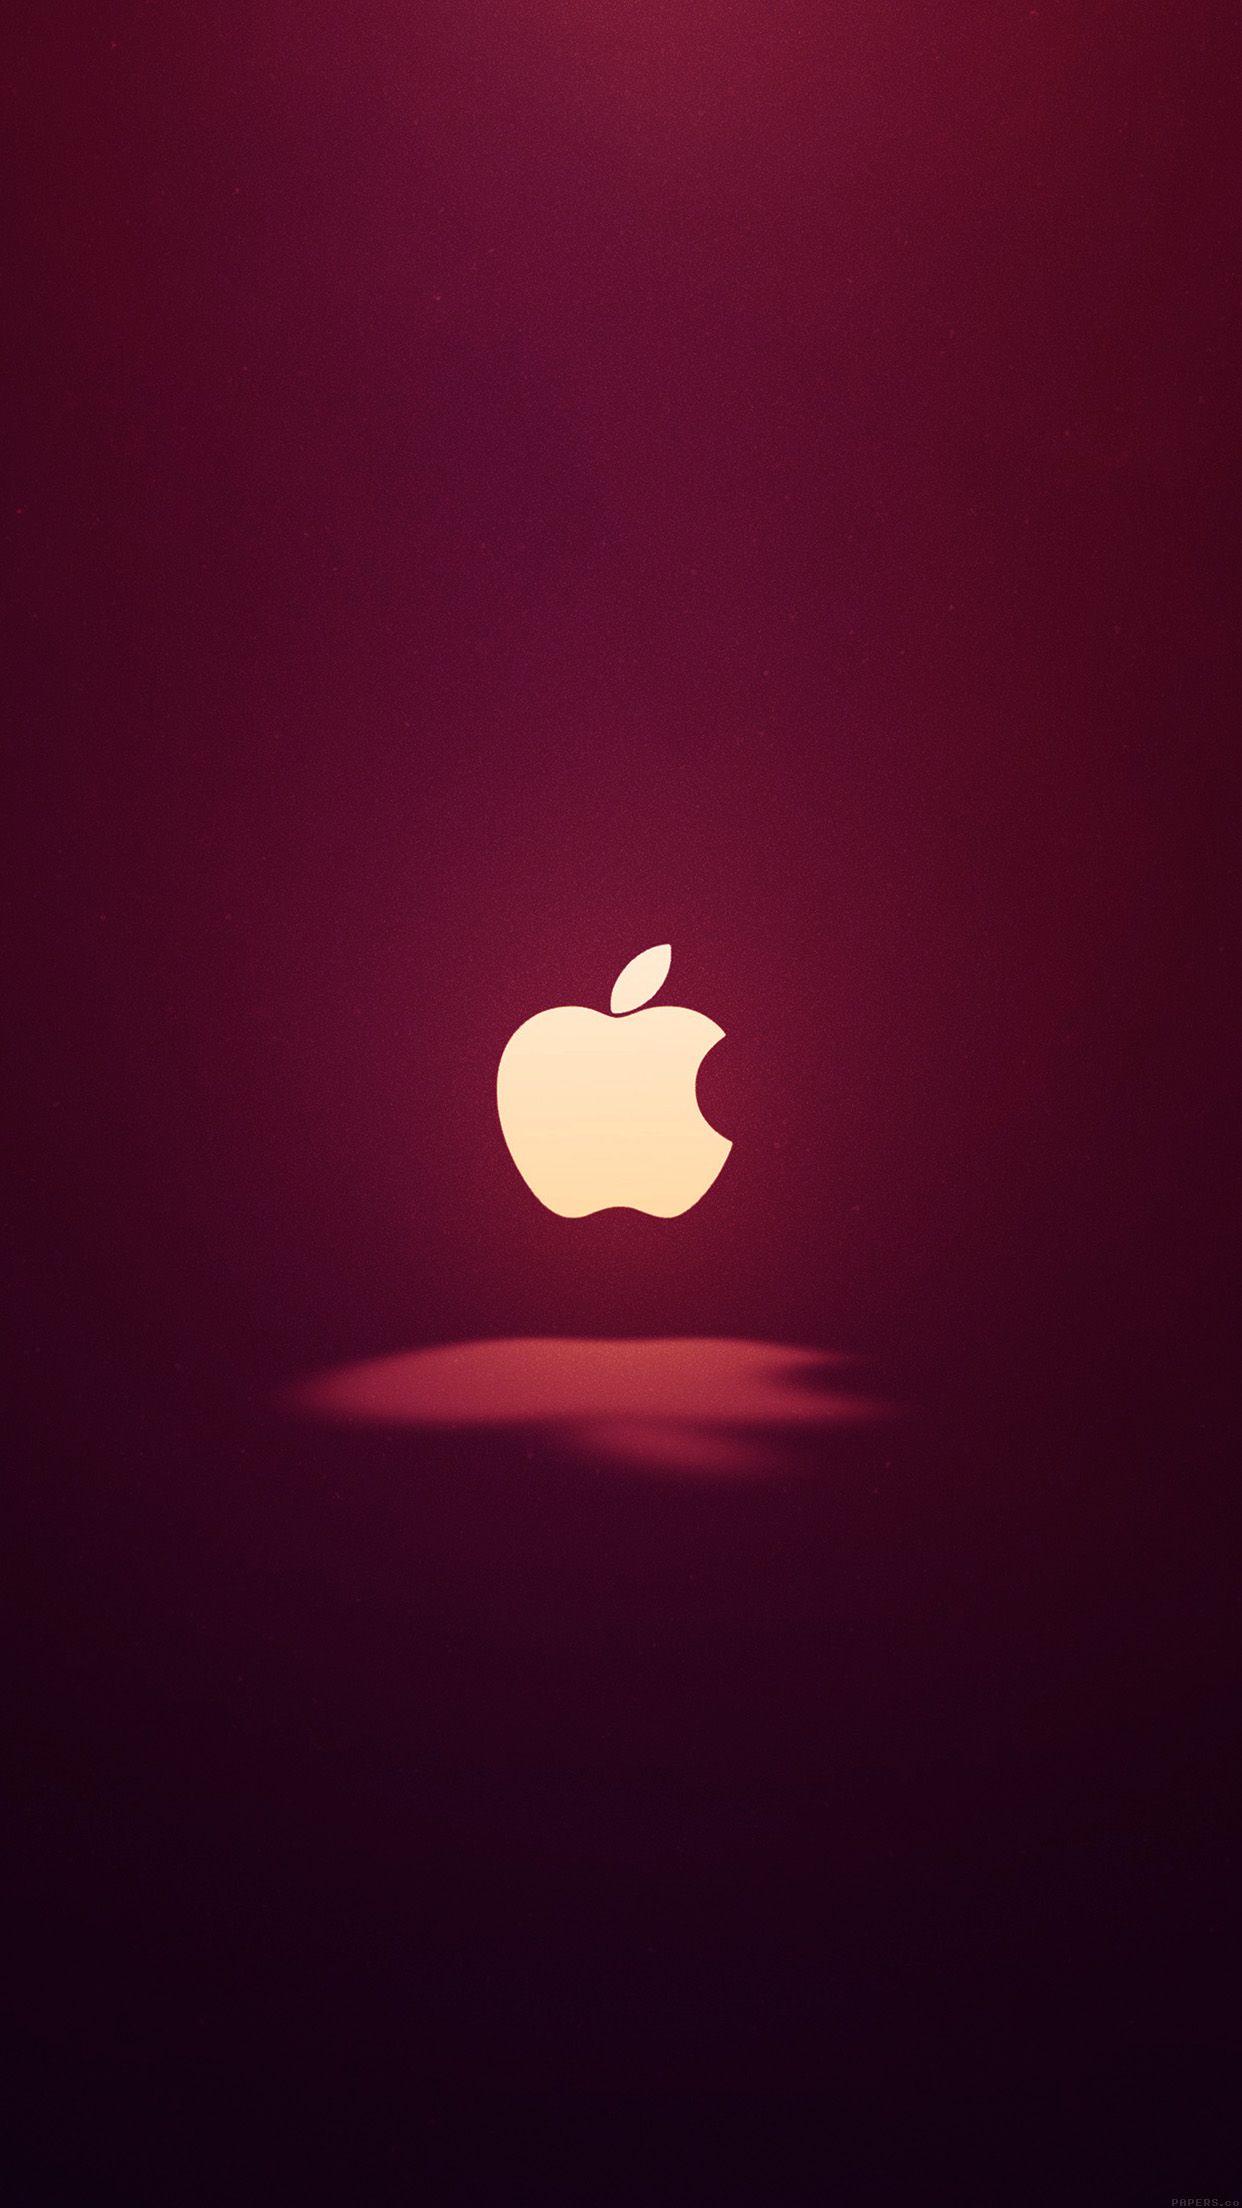 Supreme Apple Logo - awesome apple-logo-love-mania-wine-red-iphone6-plus-wallpaper ...